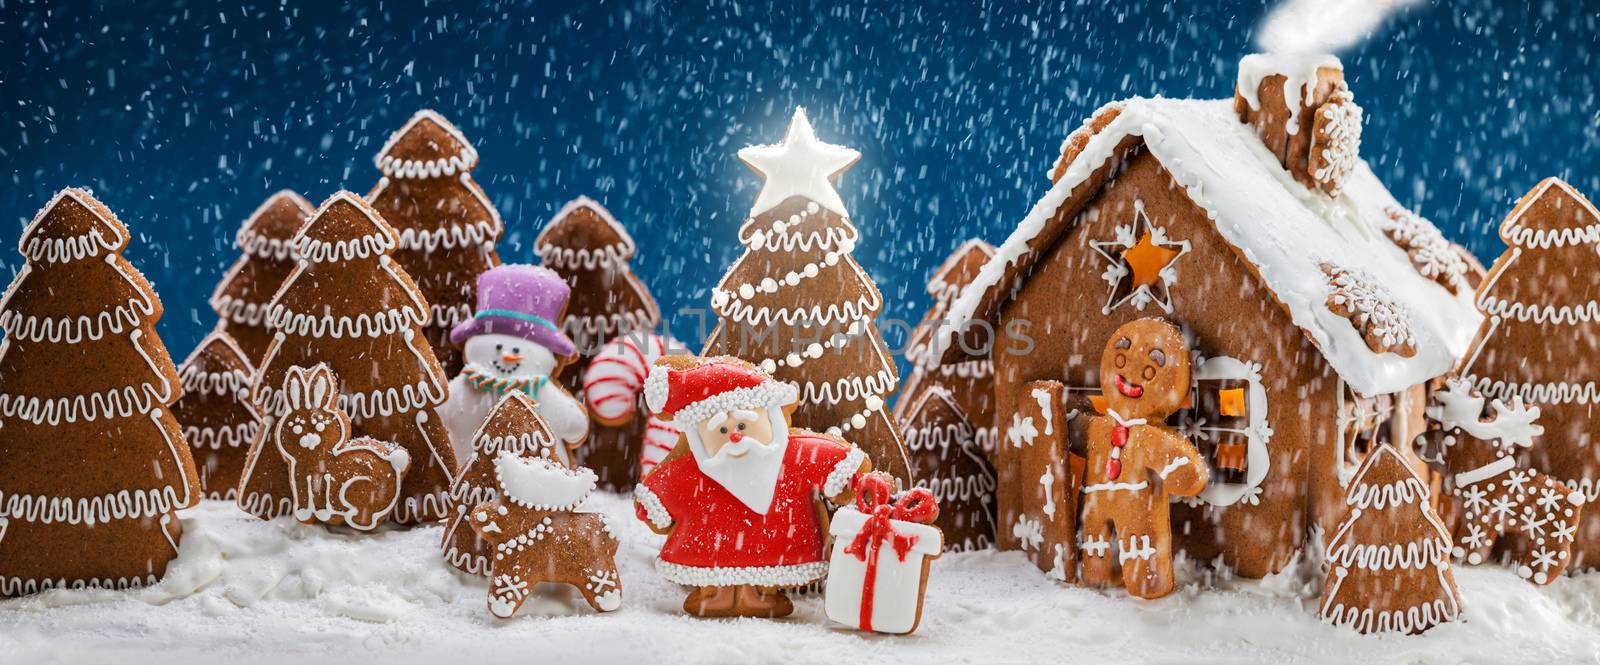 Gingerbread house christmas fir trees Santa Claus and gift cookies winter holiday celebration concept